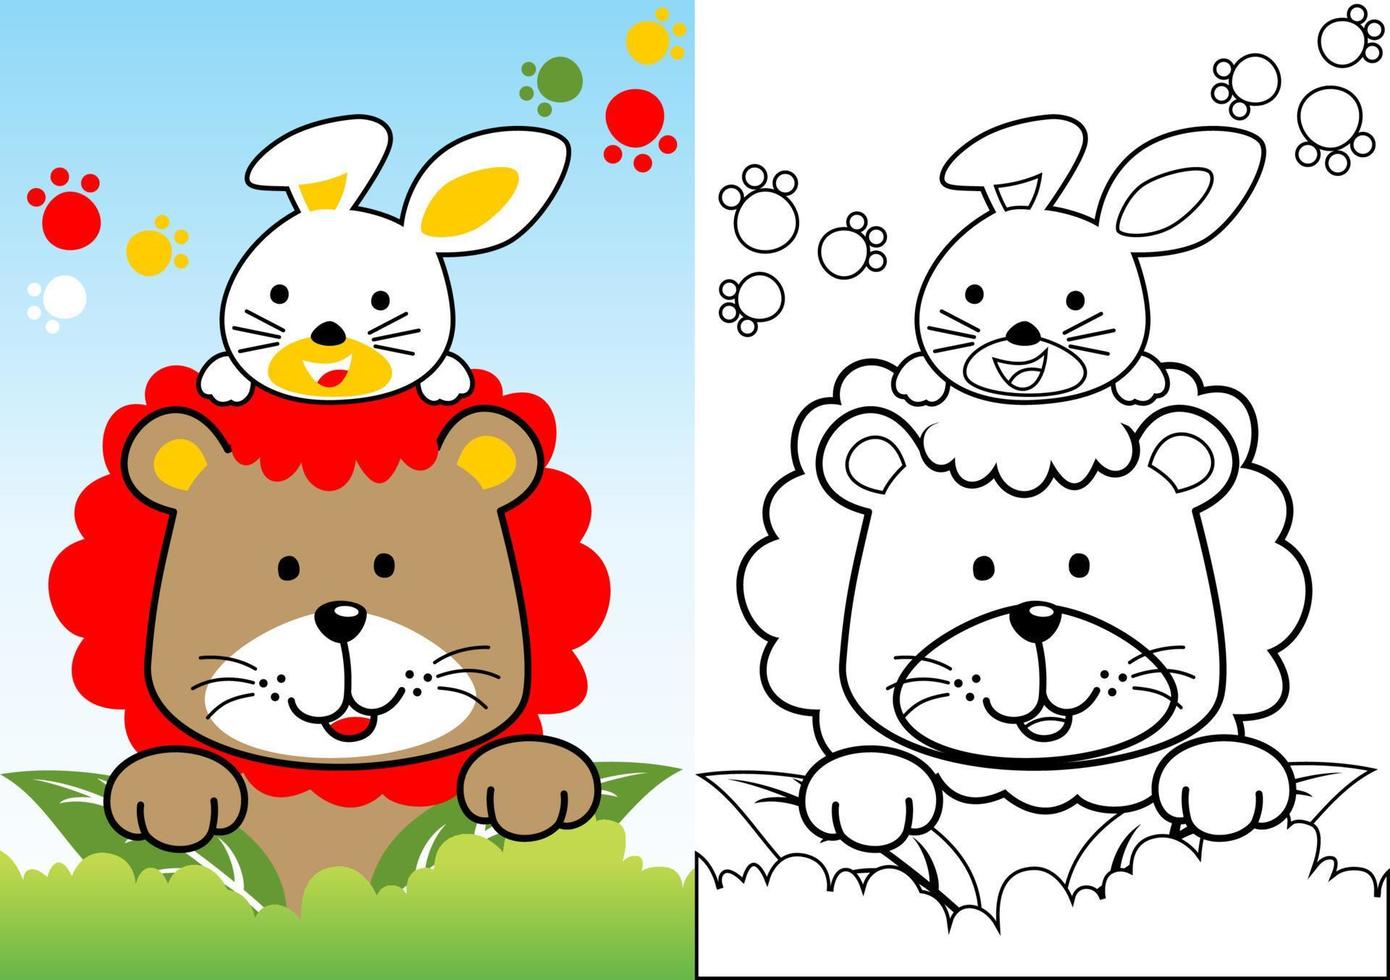 Cute lion and rabbit in bush, vector cartoon illustration, coloring book or page